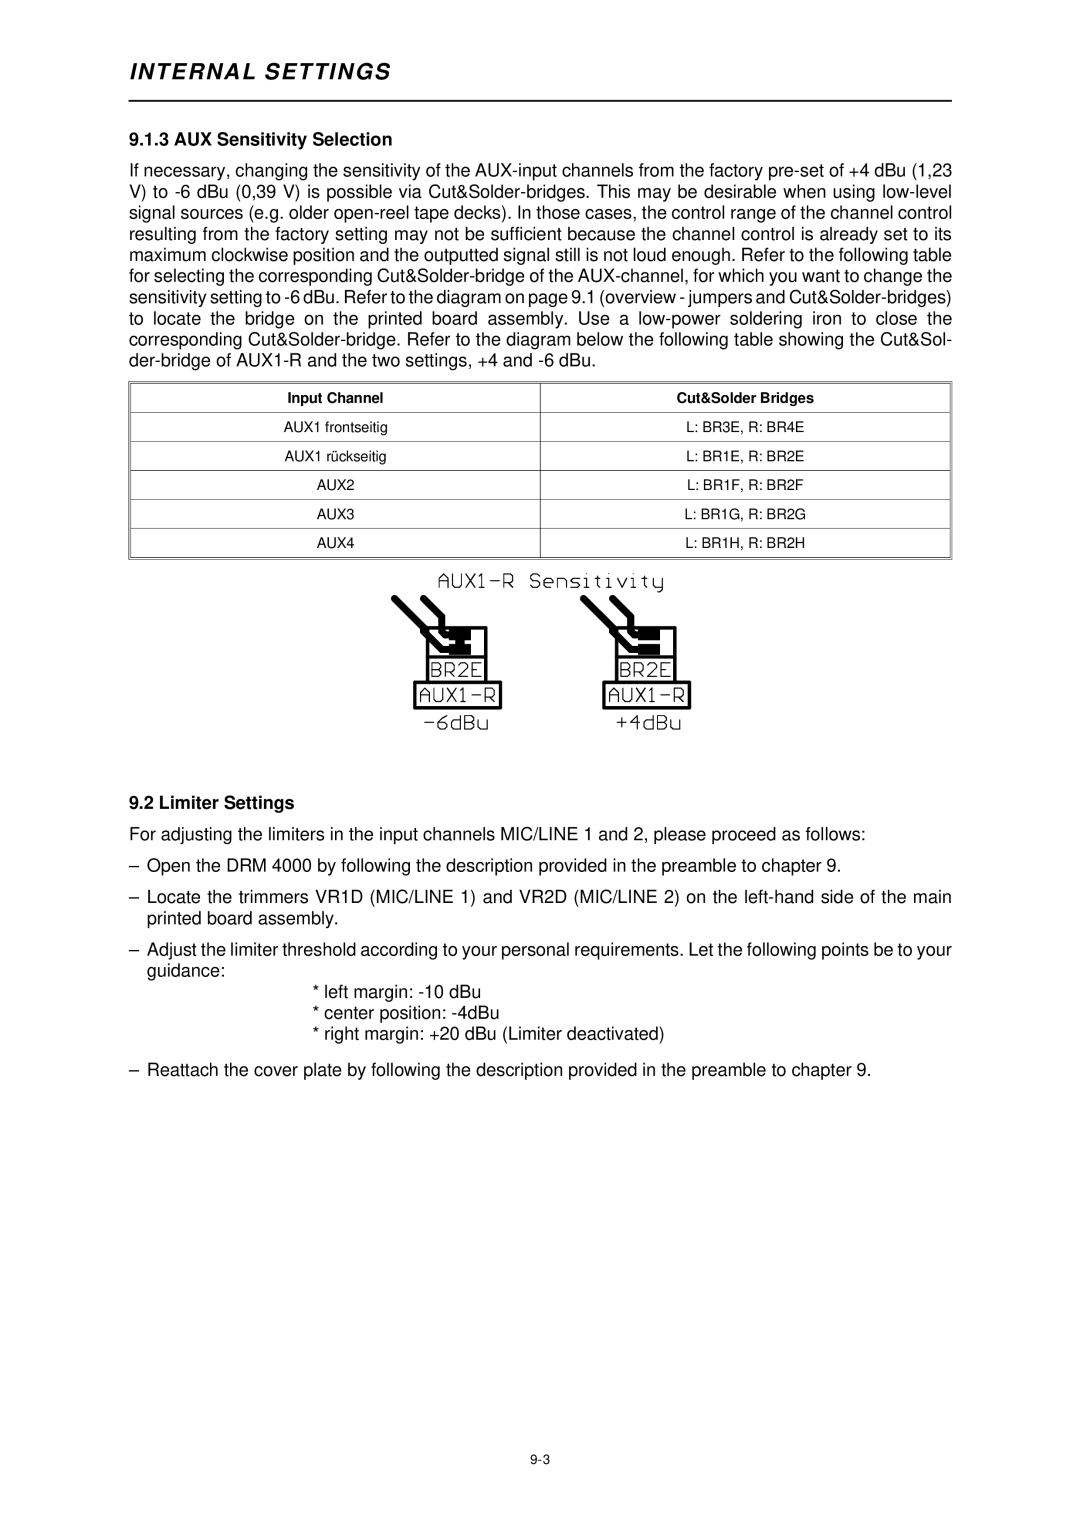 Dynacord DRM 4000 owner manual AUX Sensitivity Selection, Limiter Settings 